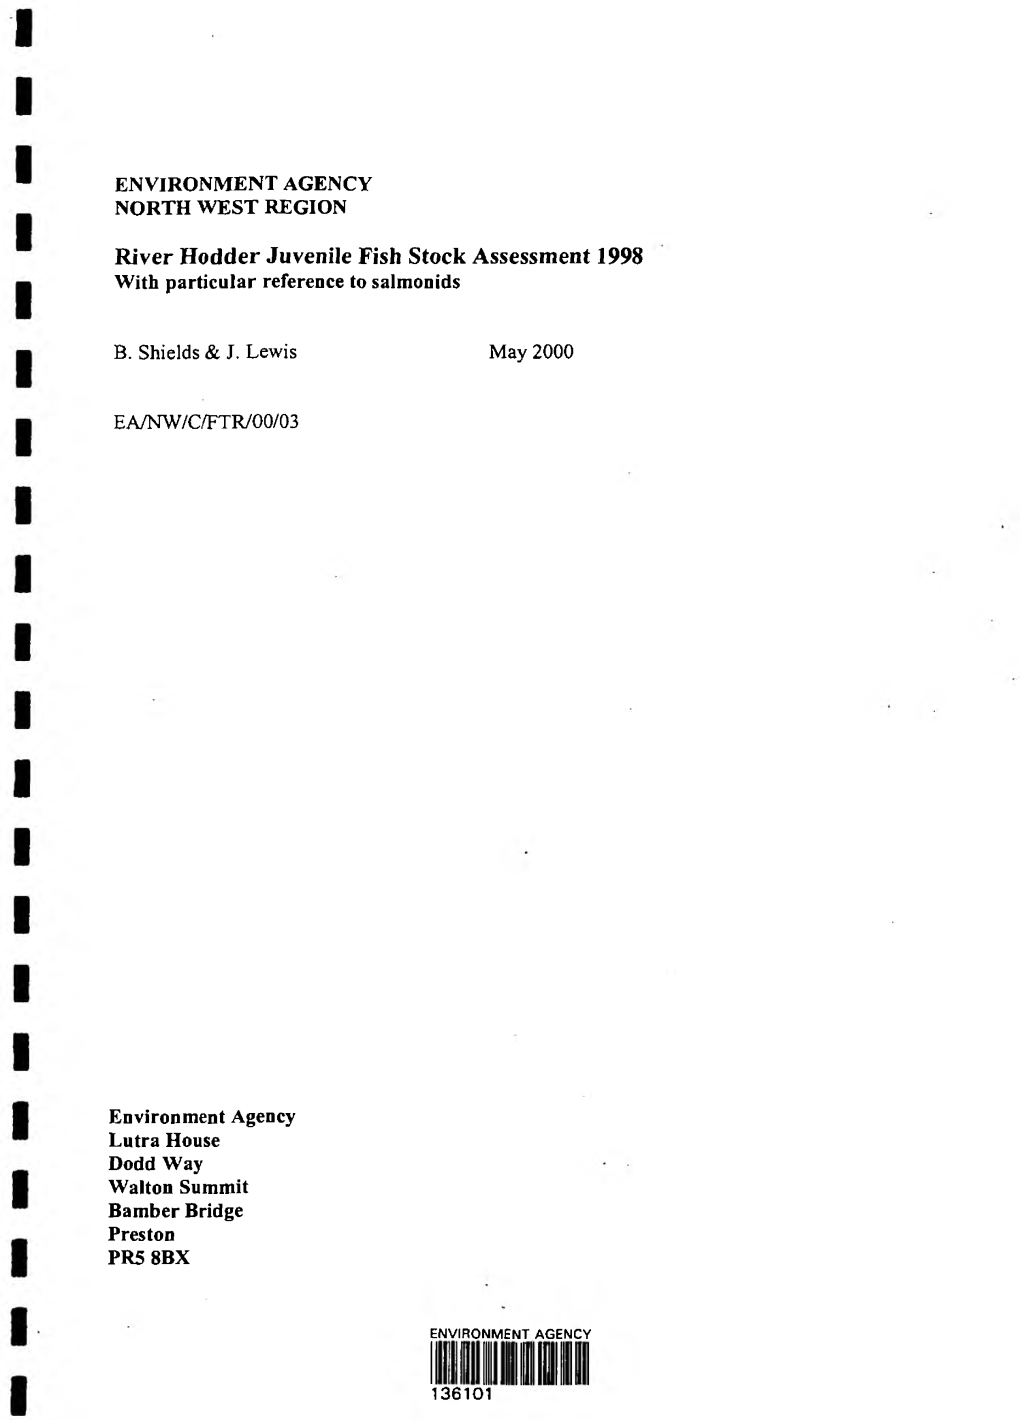 River Hodder Juvenile Fish Stock Assessment 1998 with Particular Reference to Salmonids